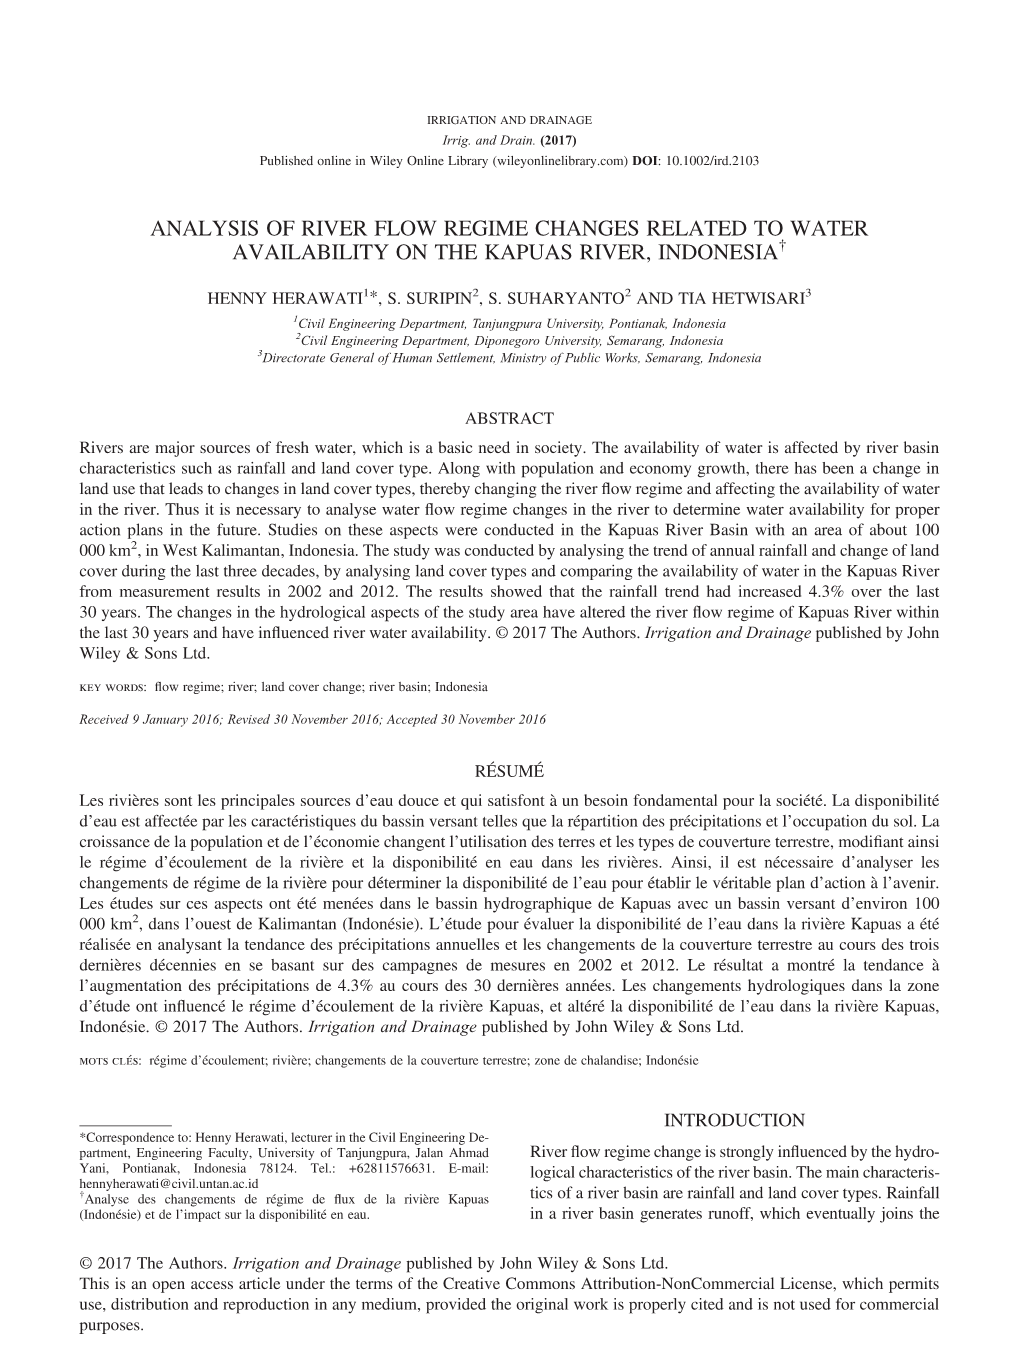 Analysis of River Flow Regime Changes Related to Water Availability on the Kapuas River, Indonesia†